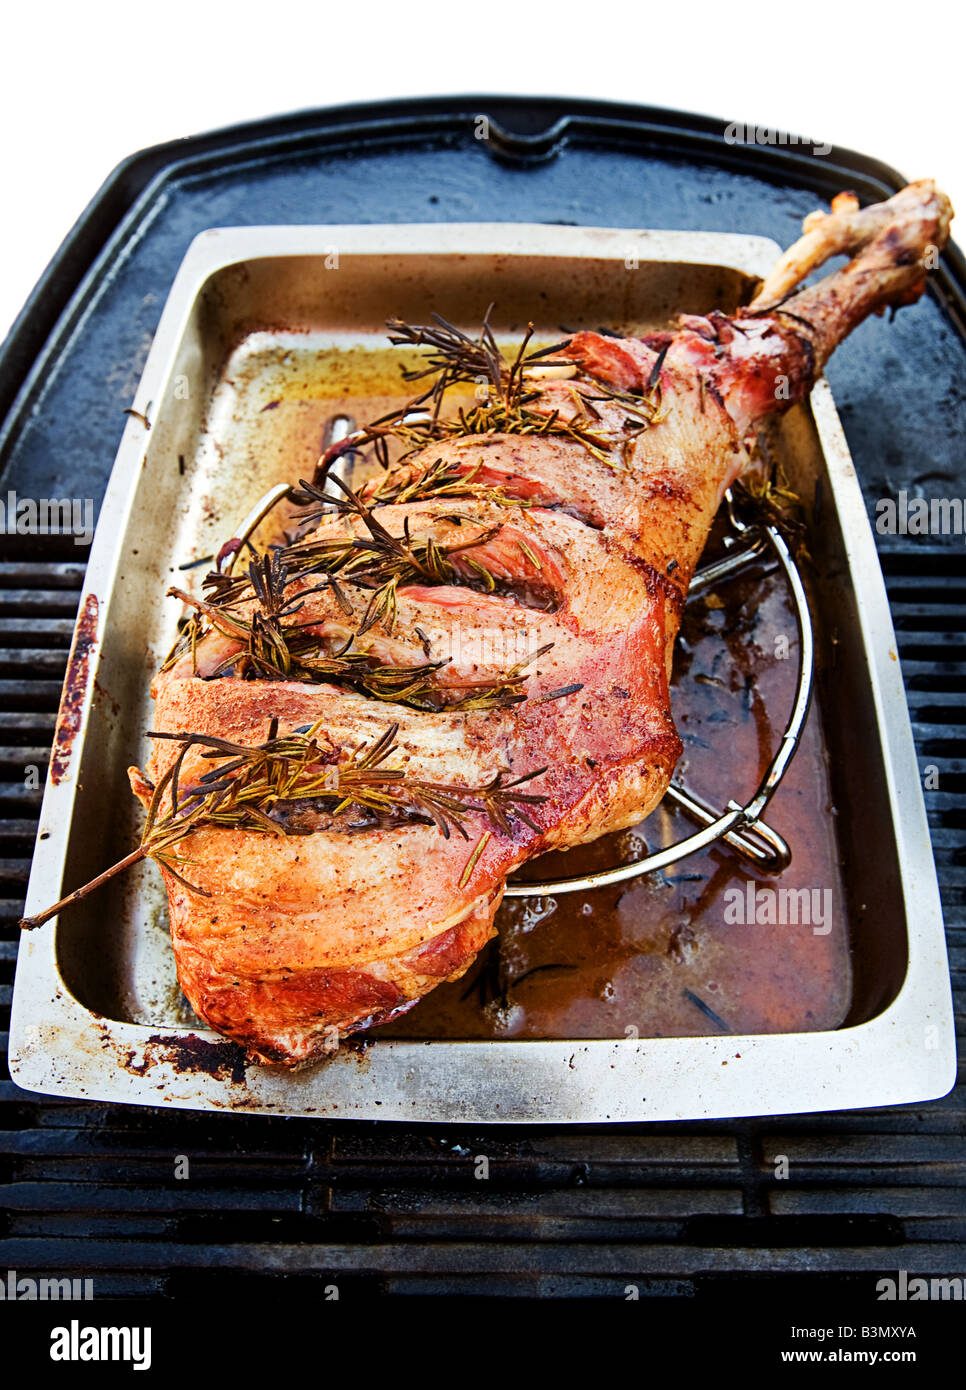 Shot of a Leg of Lamb being Cooked on the BBQ Stock Photo - Alamy